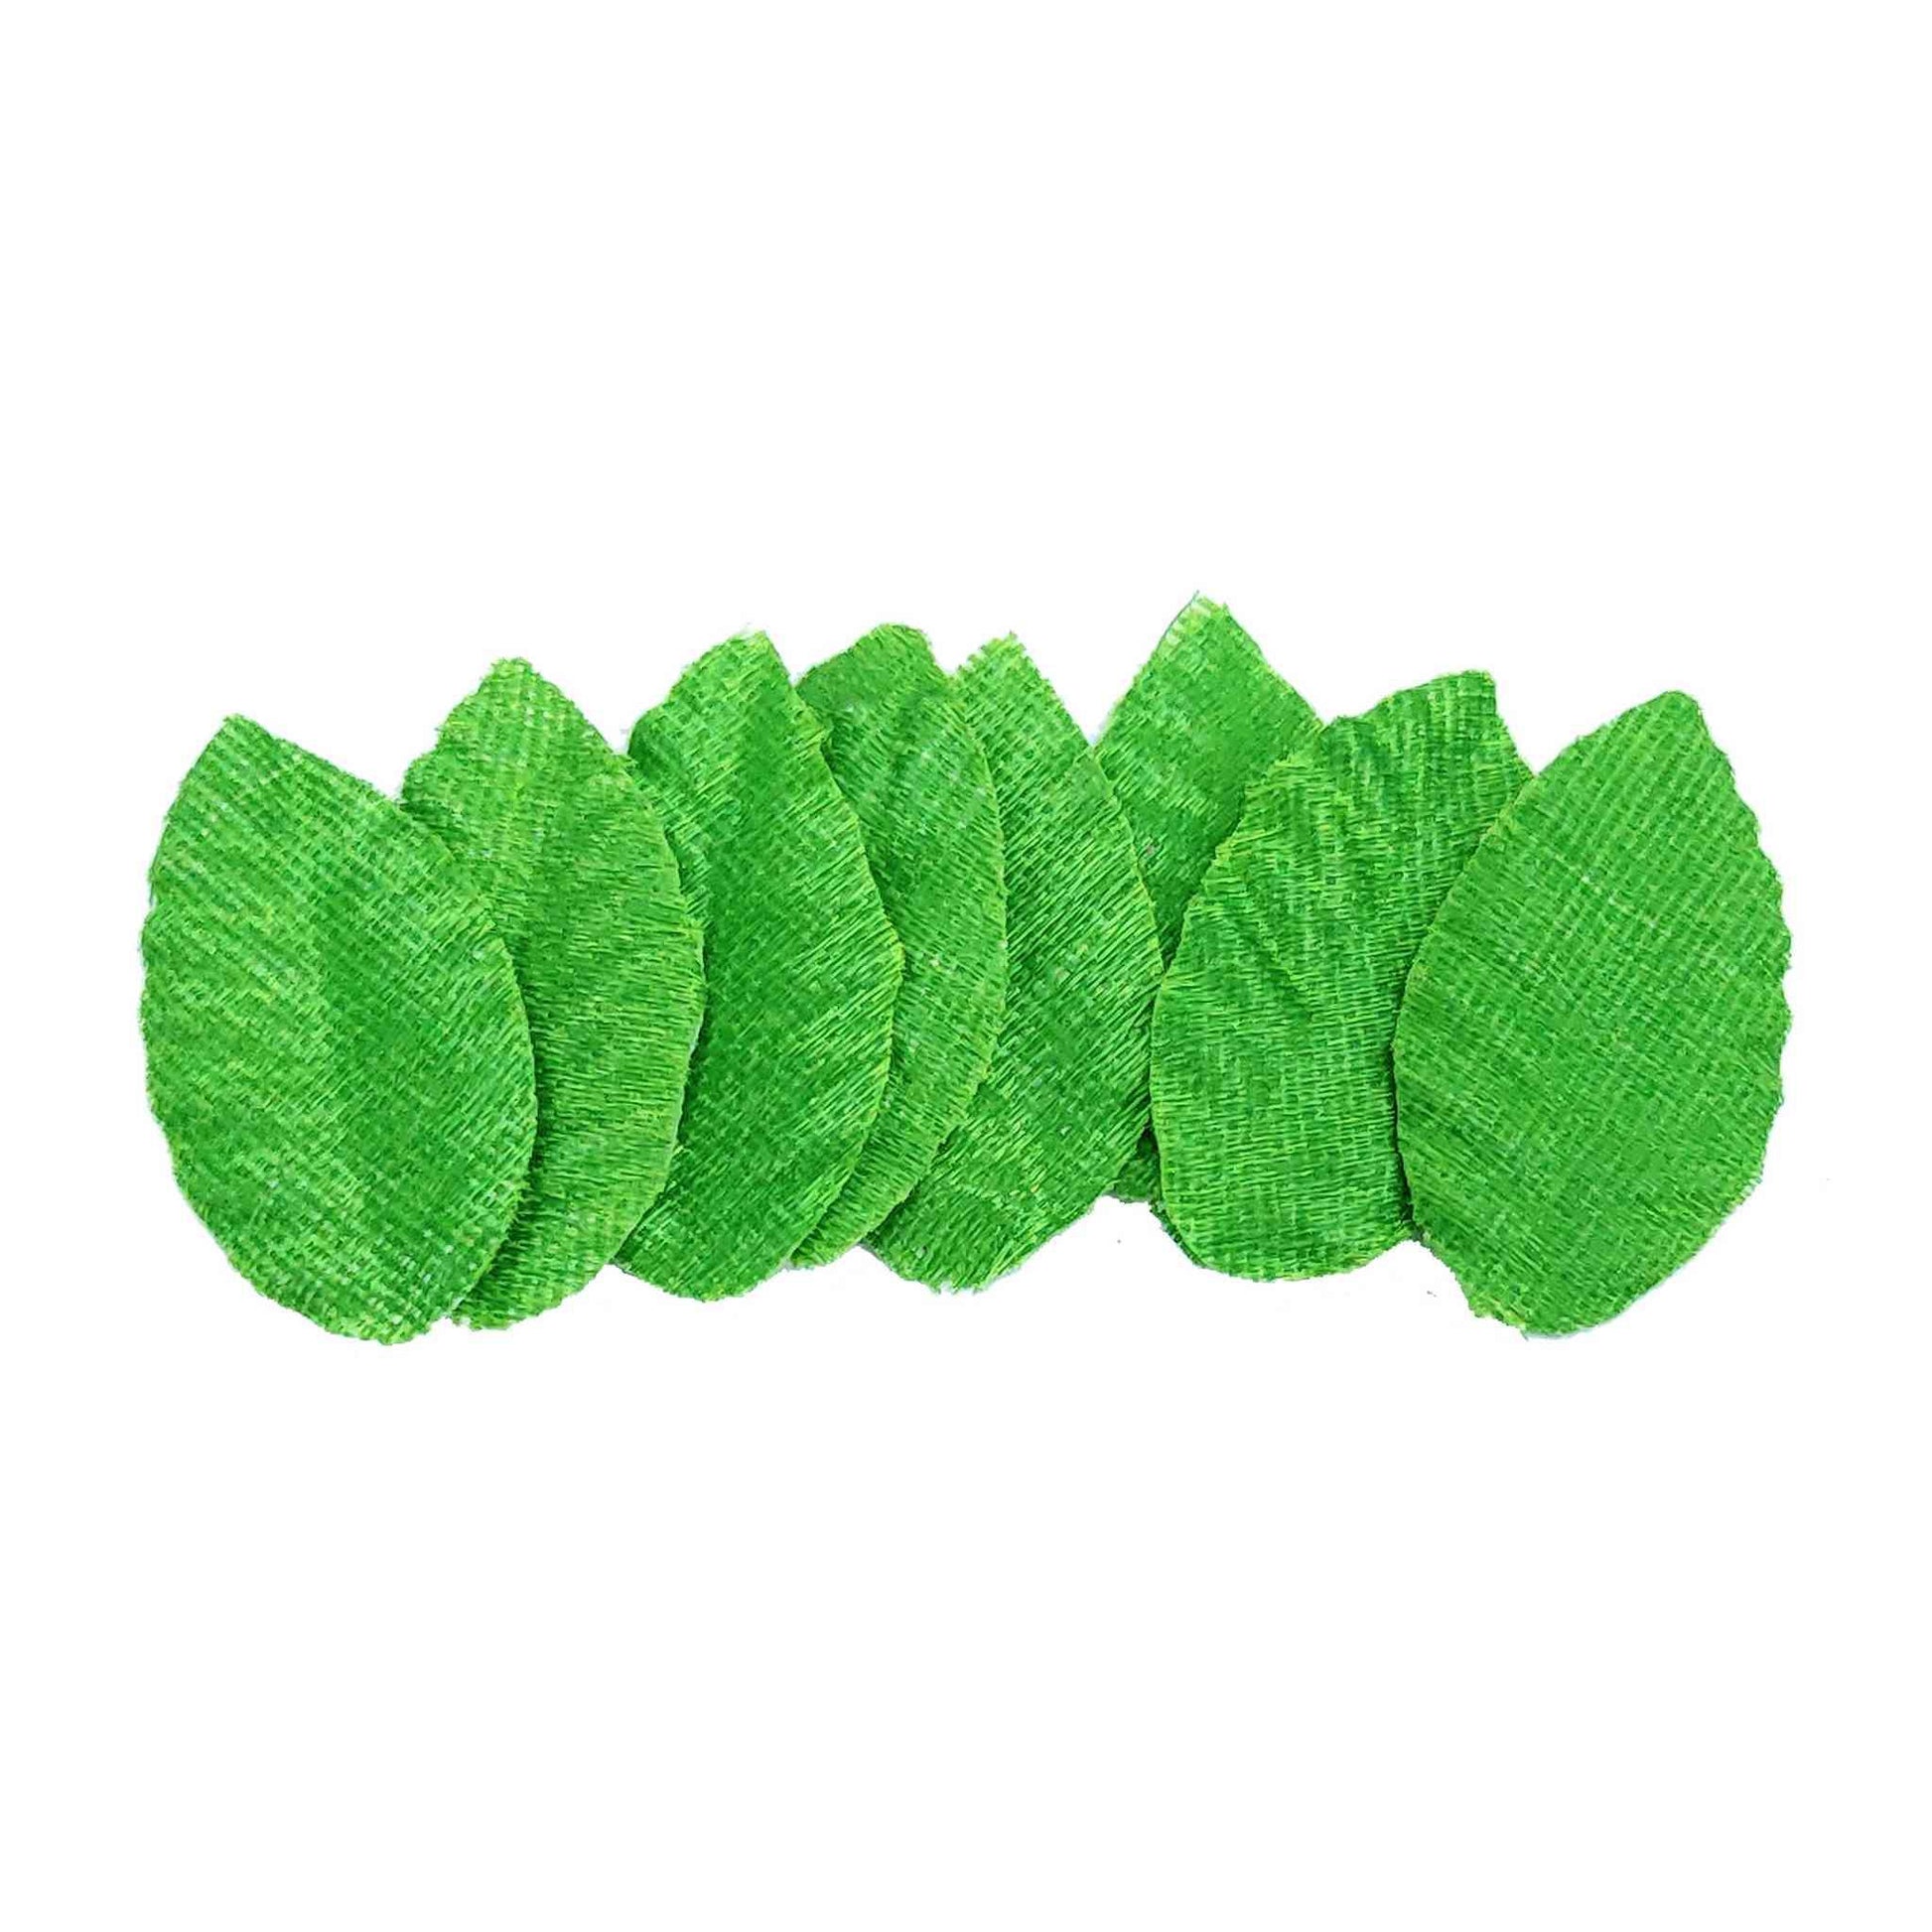 Mini Fabric Leaves for DIY Craft, Trouseau Packing or Decoration (Bunch of 12) - Design 61, Green - Indian Petals